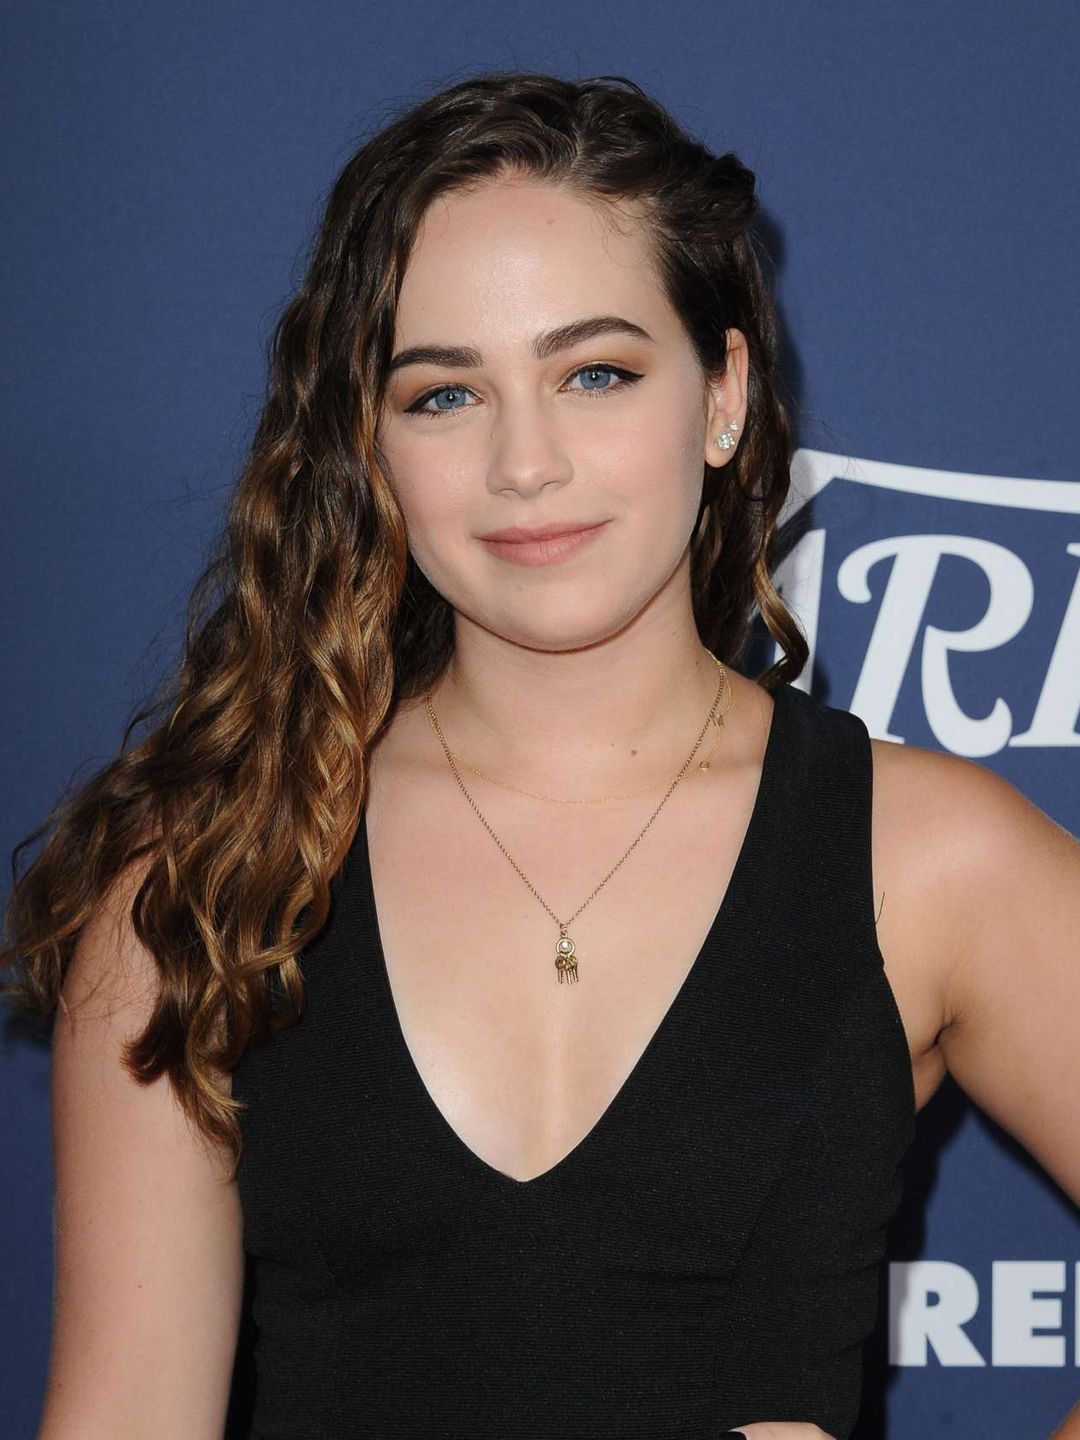 Mary Mouser main achievements